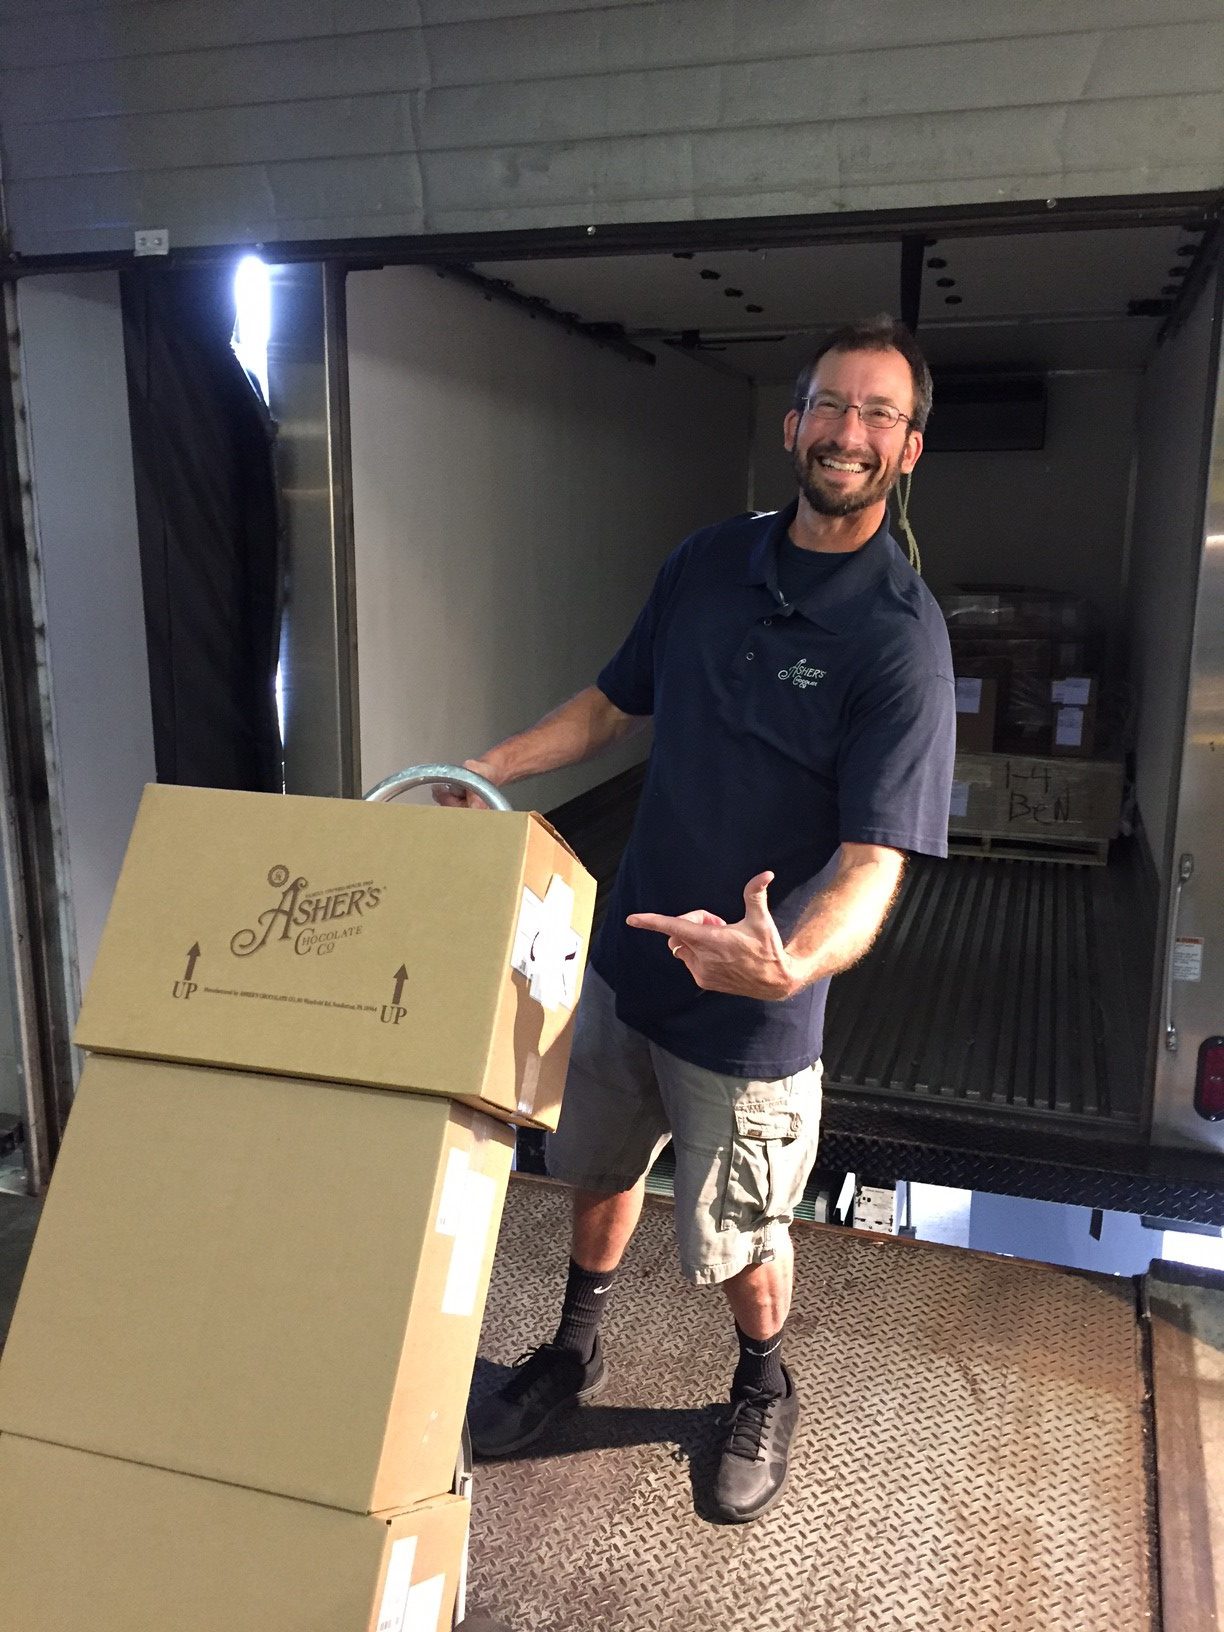 Asher's Chocolate Co. employee highlight and delivery driver, Ben Gossard, unloading a stack of boxes for an Asher's delivery.